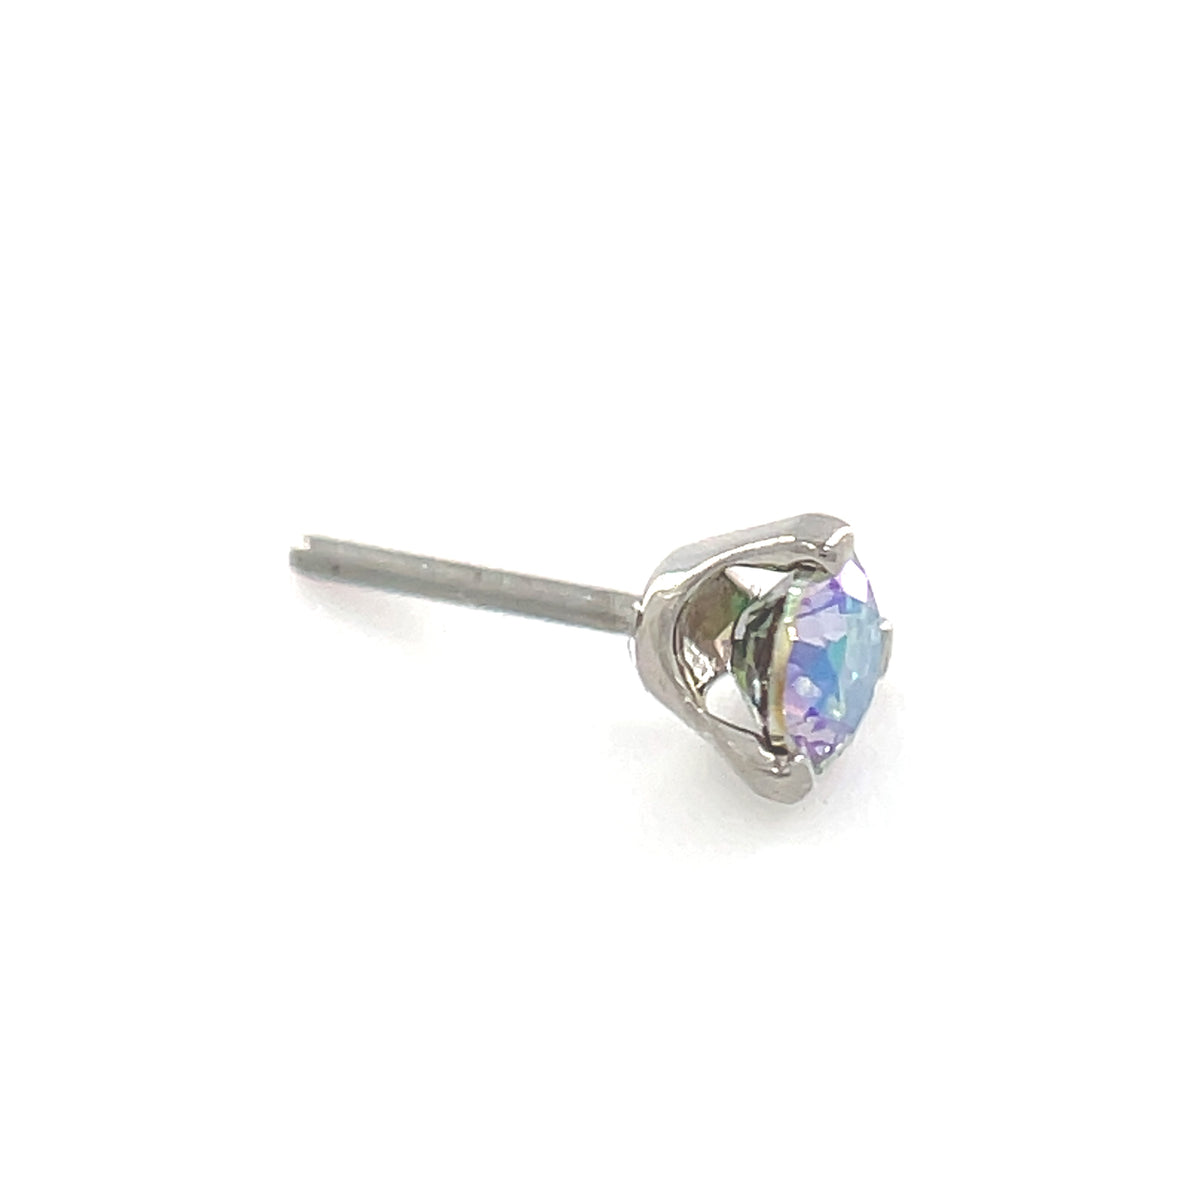 Industrial Strength Round Shine CZ 3 Prong End THREADLESS